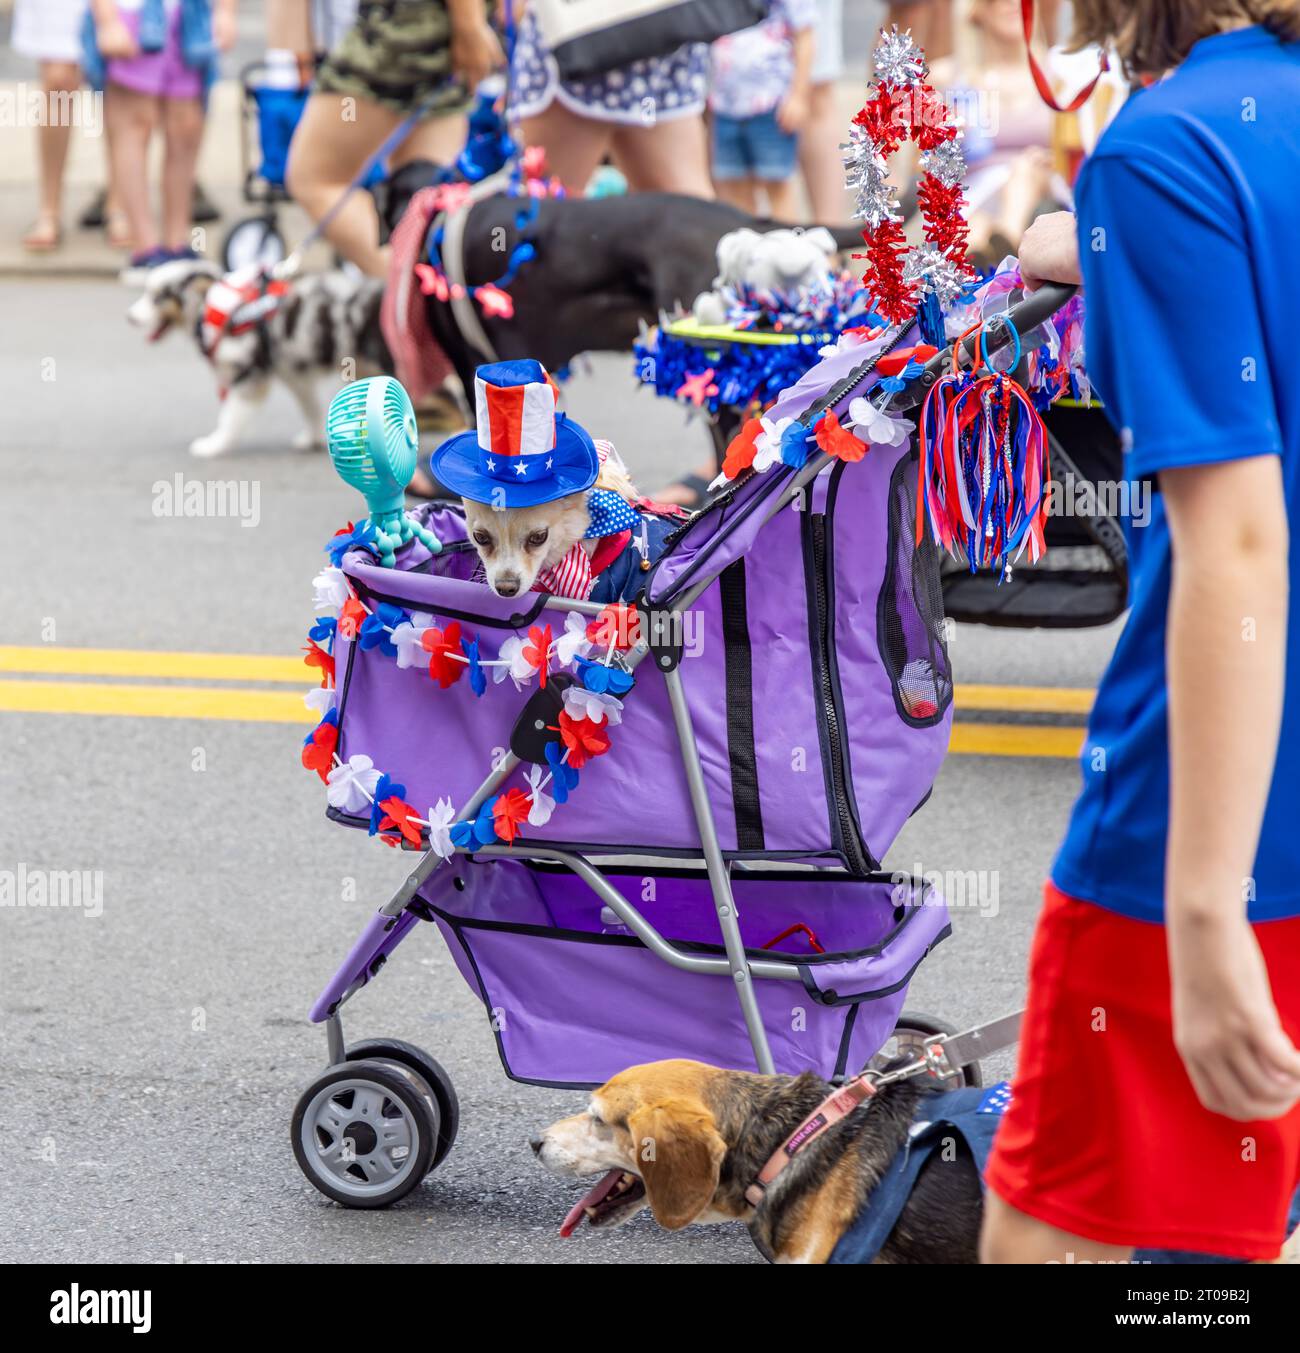 A small dog in costume riding in a purple baby carriage in a parade Stock Photo